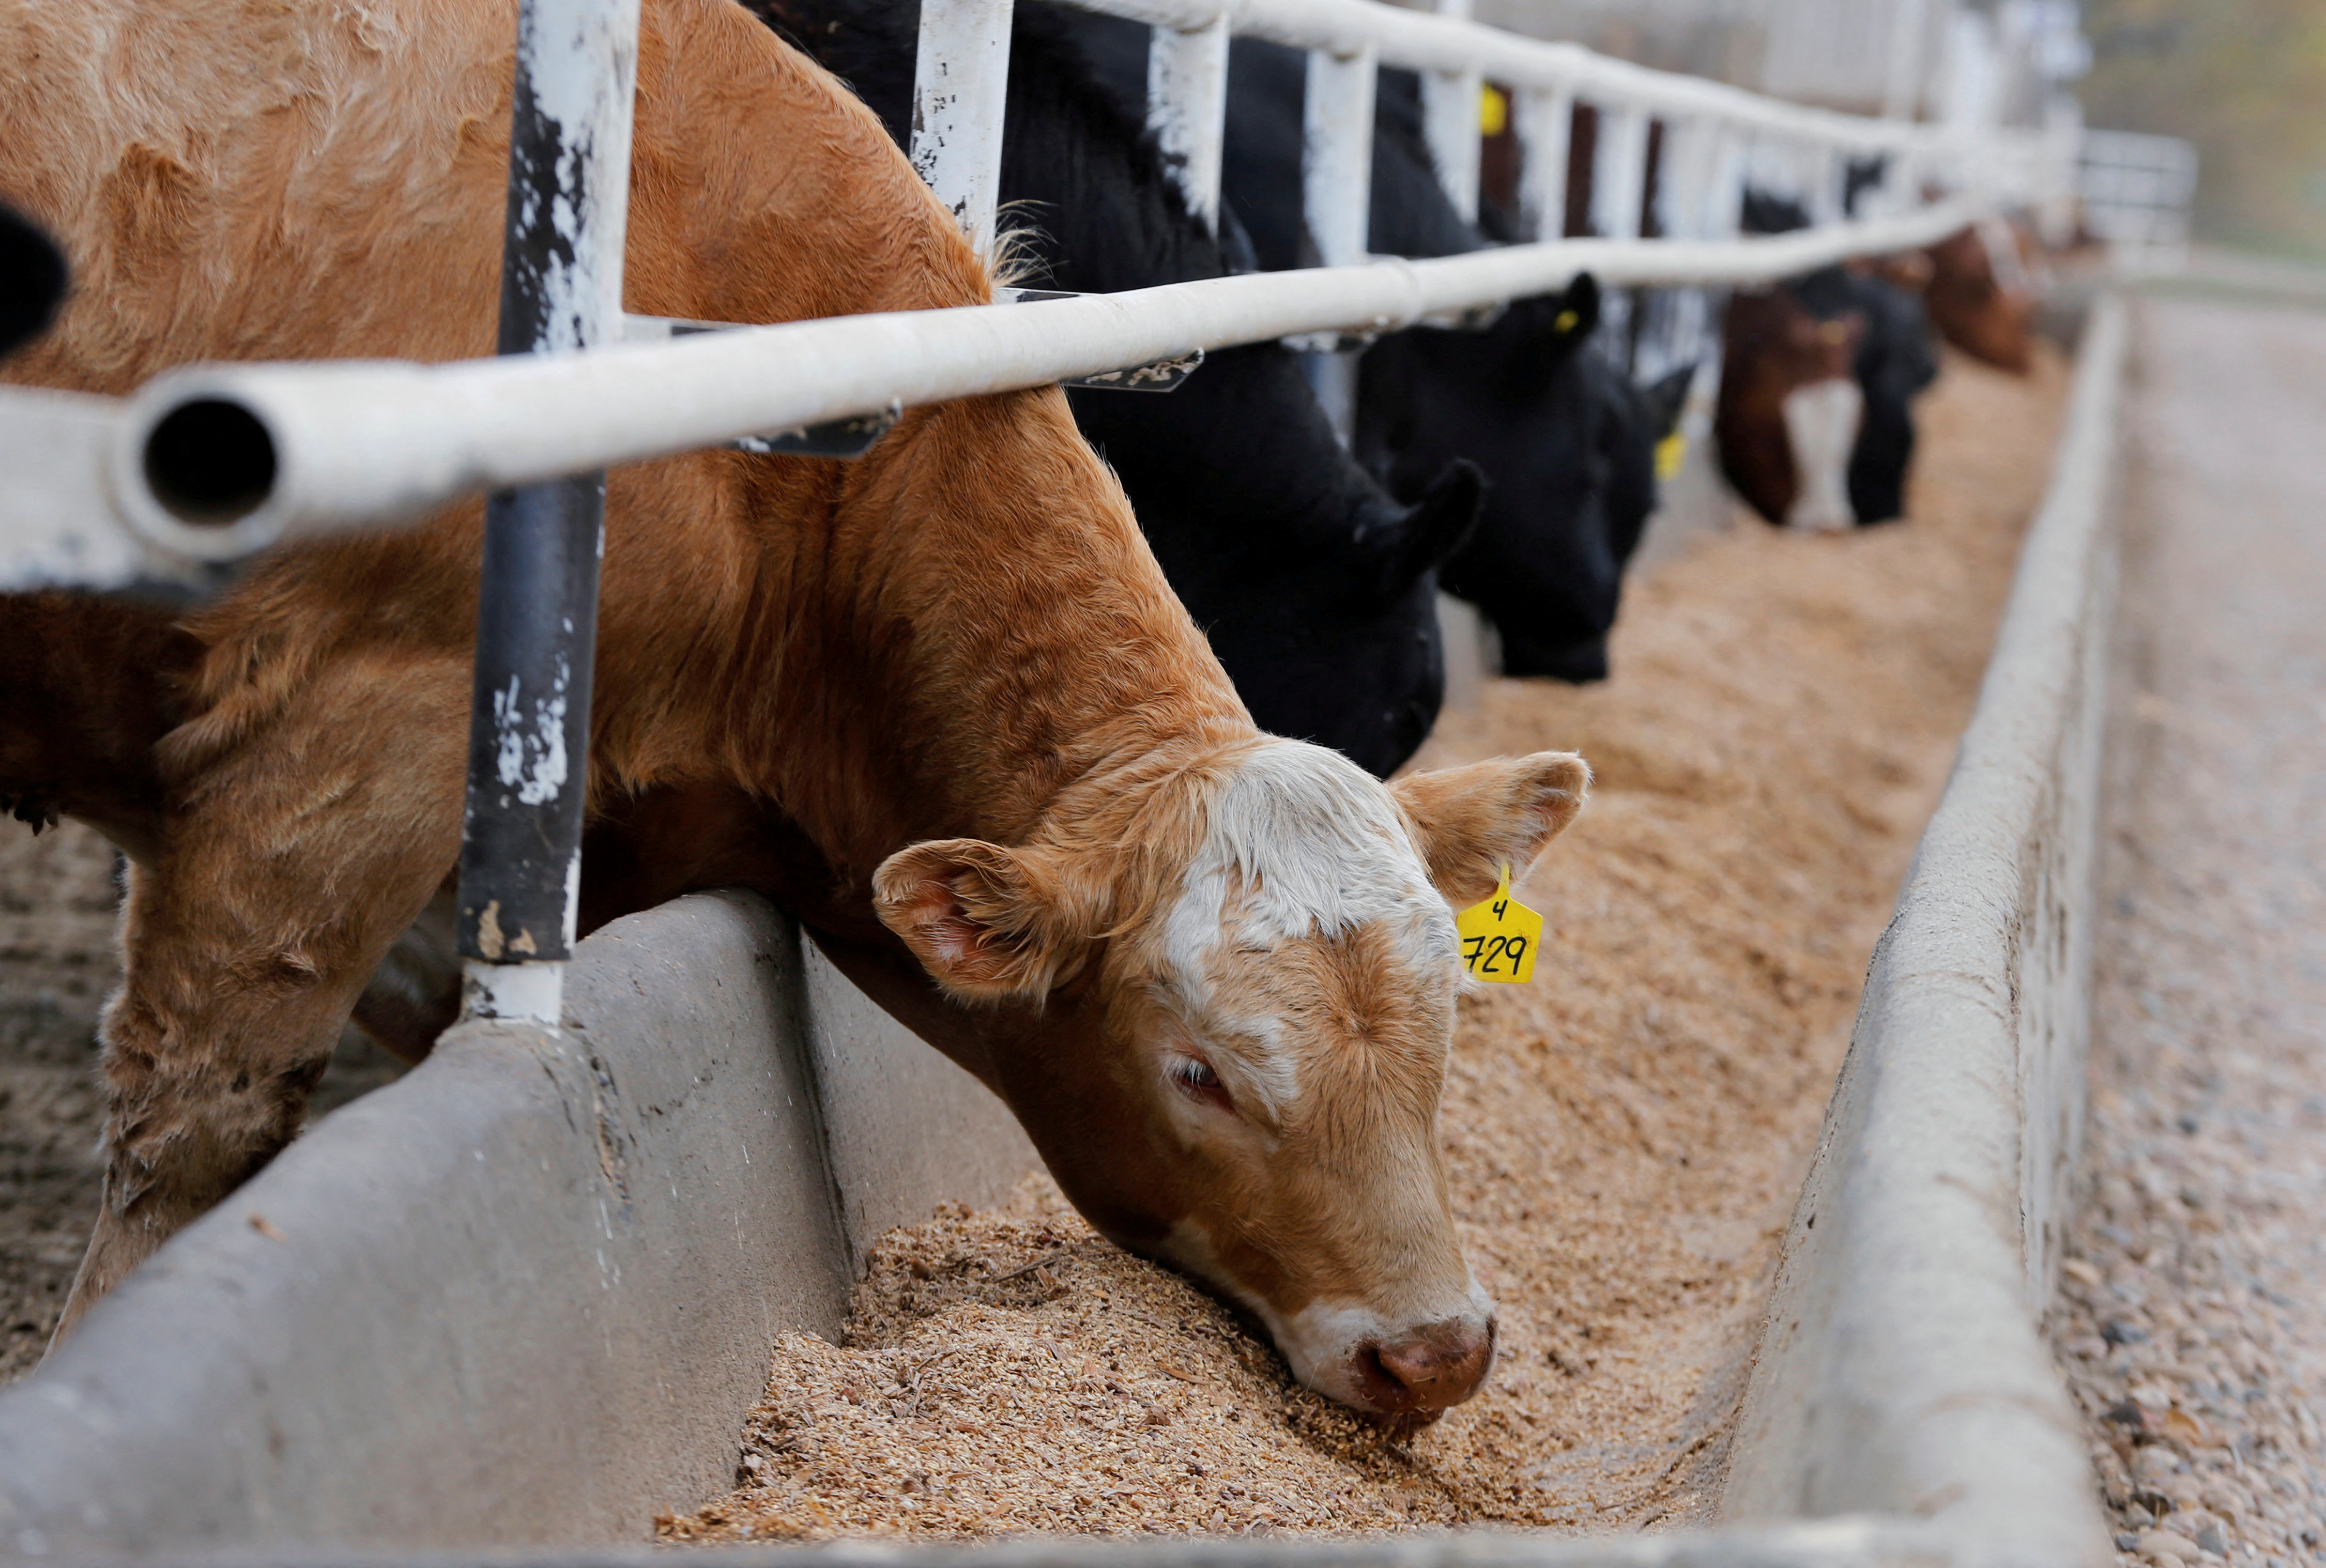 Beef cattle are pictured at an Alberta feedlot near Coaldale